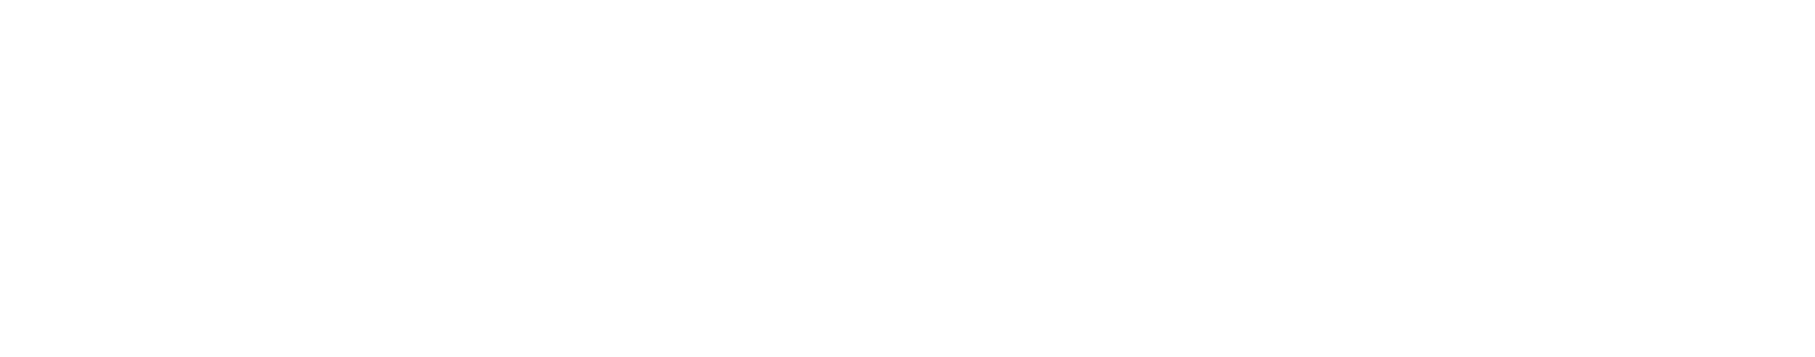 pushing chinese national brands to the caribbean